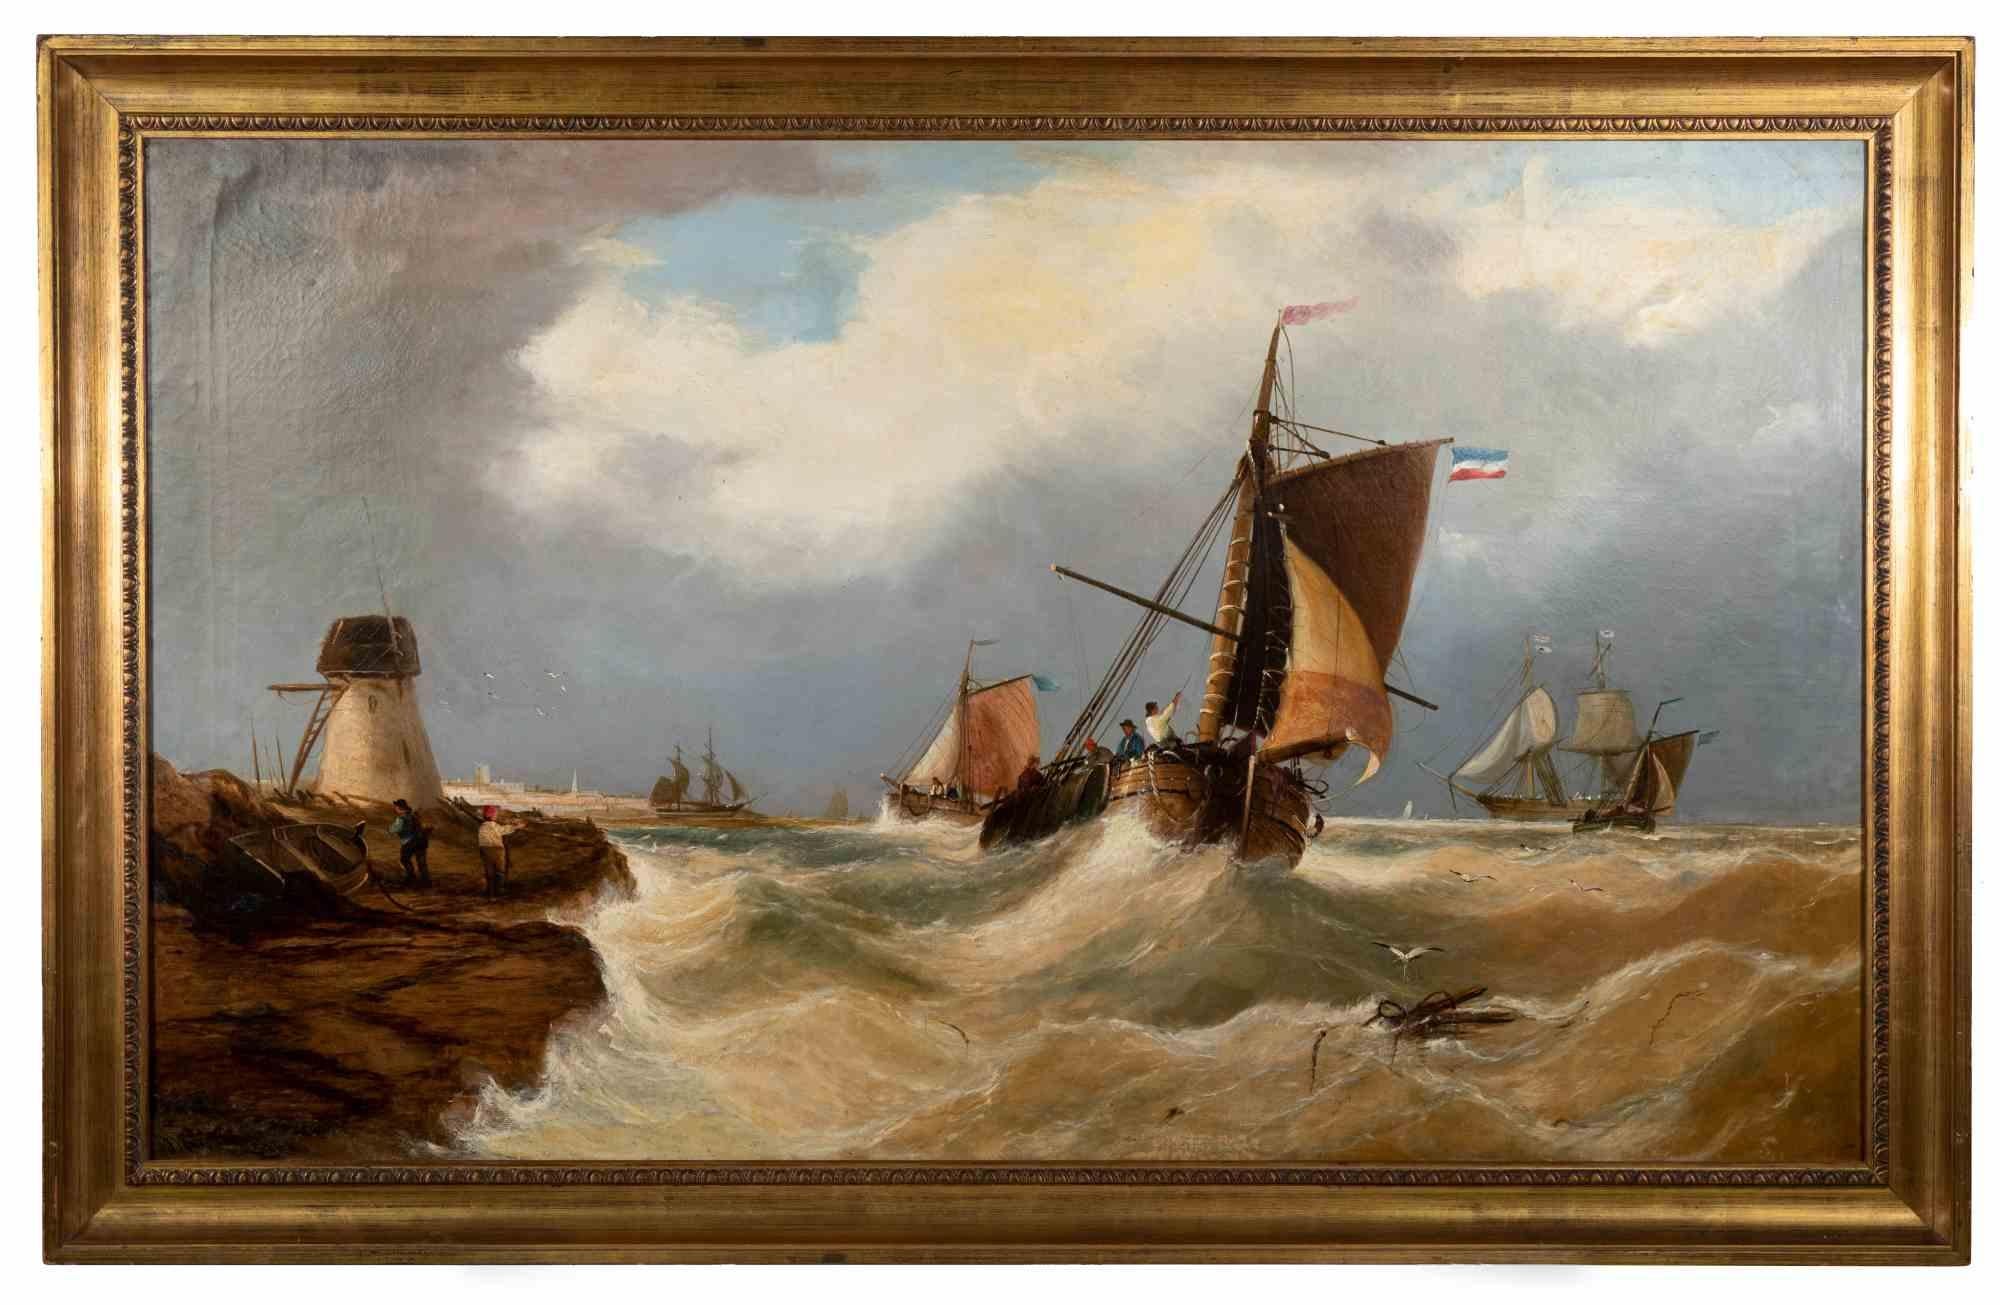 Unknown Figurative Painting - Stormy Sea - Mixed colored Oil on Canvas - Mid-19th Century